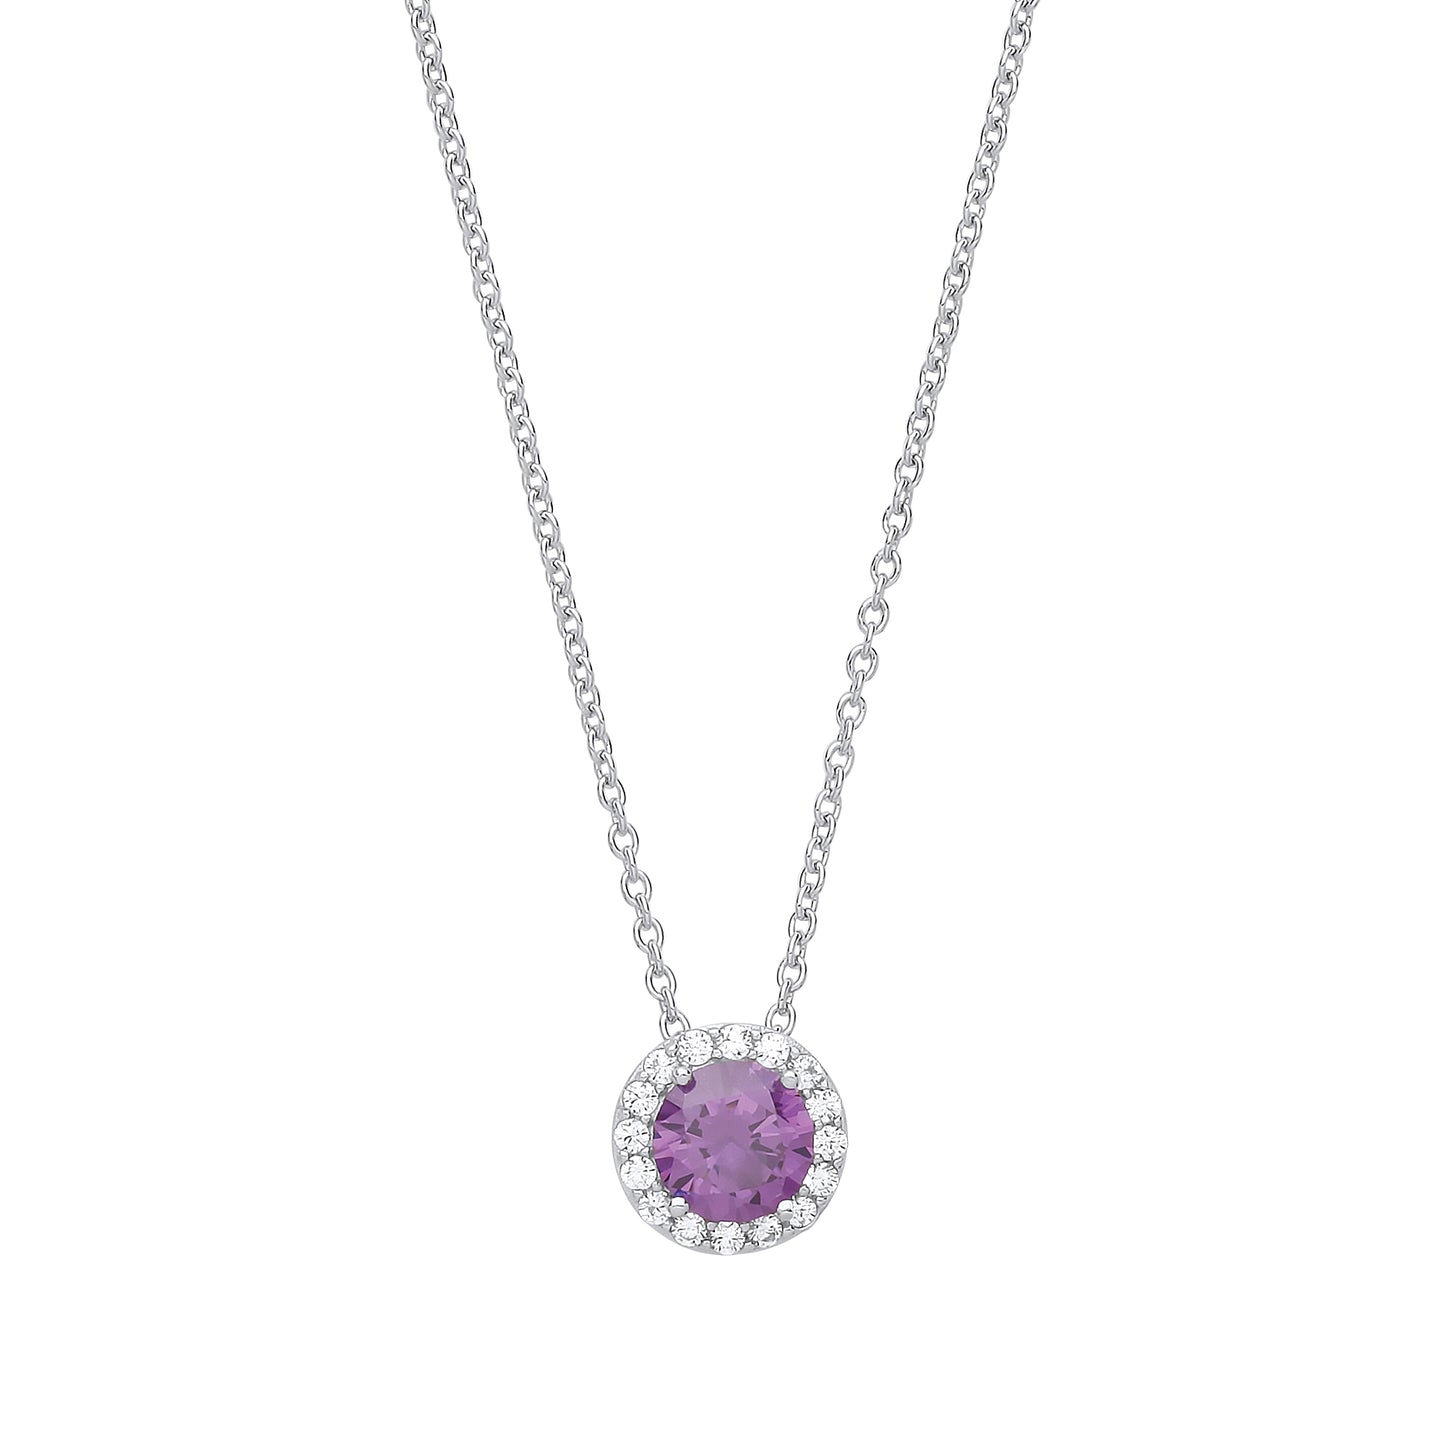 Silver  Purple CZ Solitaire Halo Charm Necklace 16 inch - GVK313